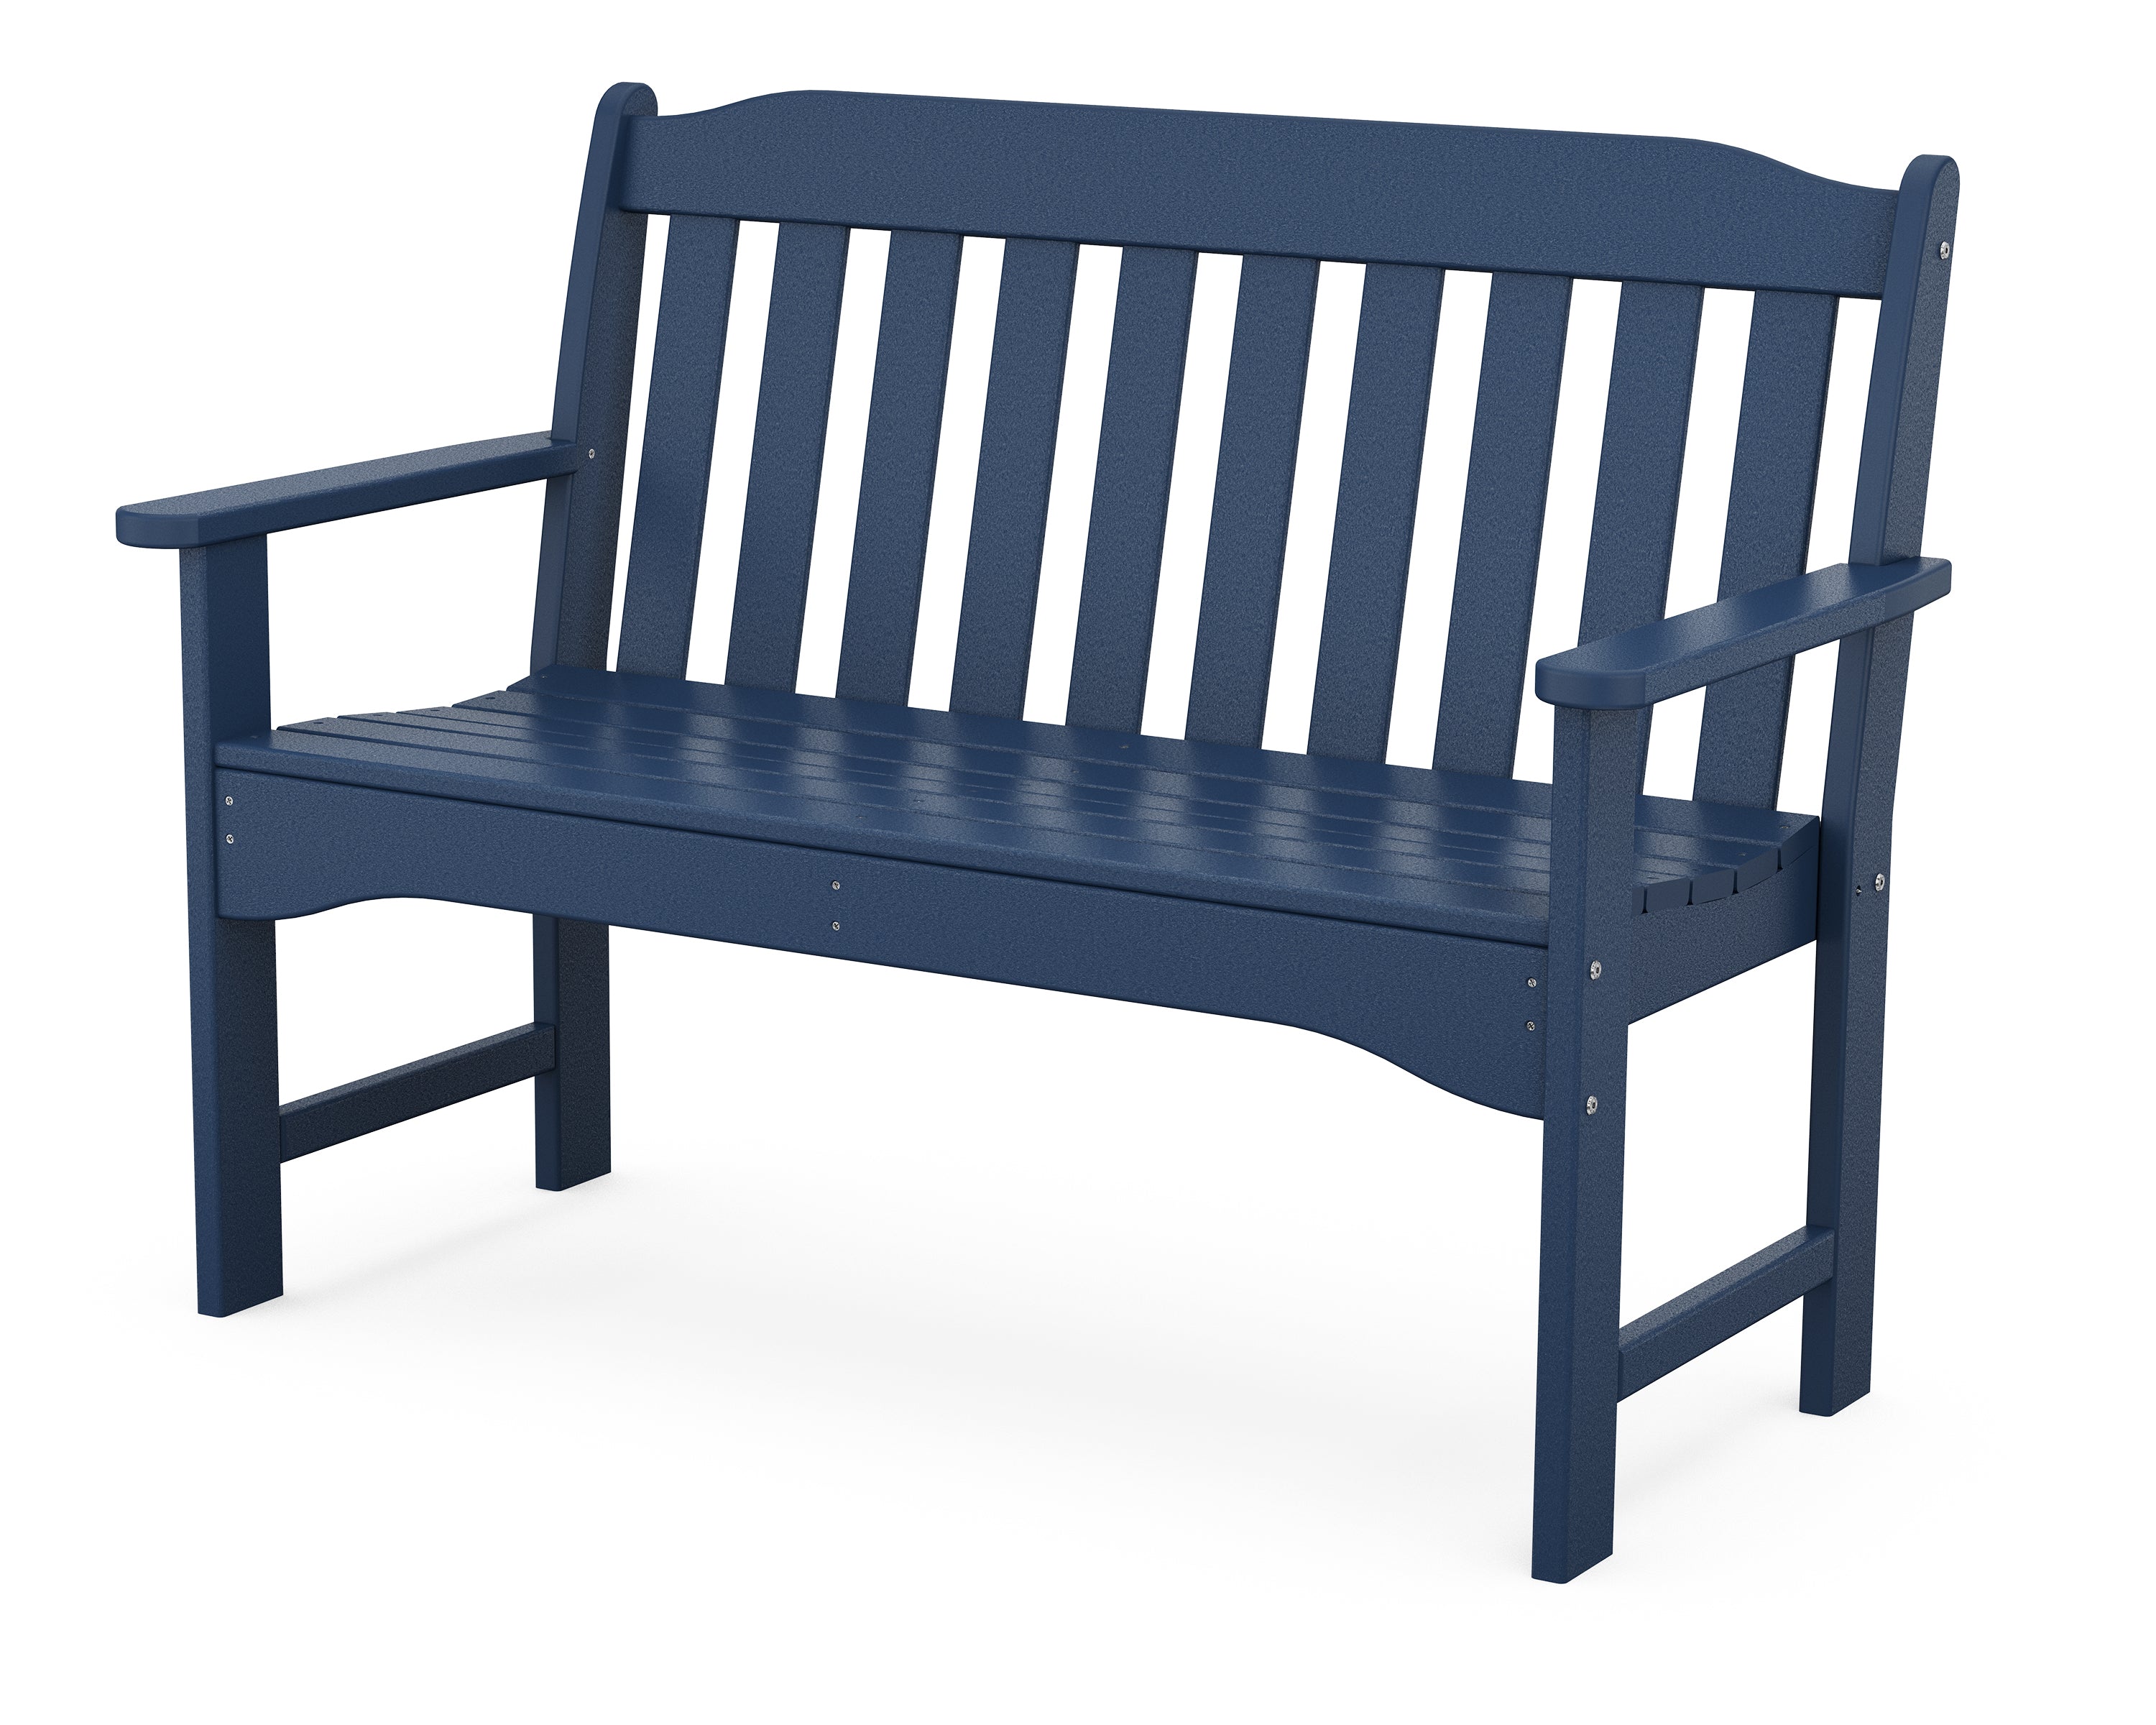 Country Living Country Living 48" Garden Bench in Navy